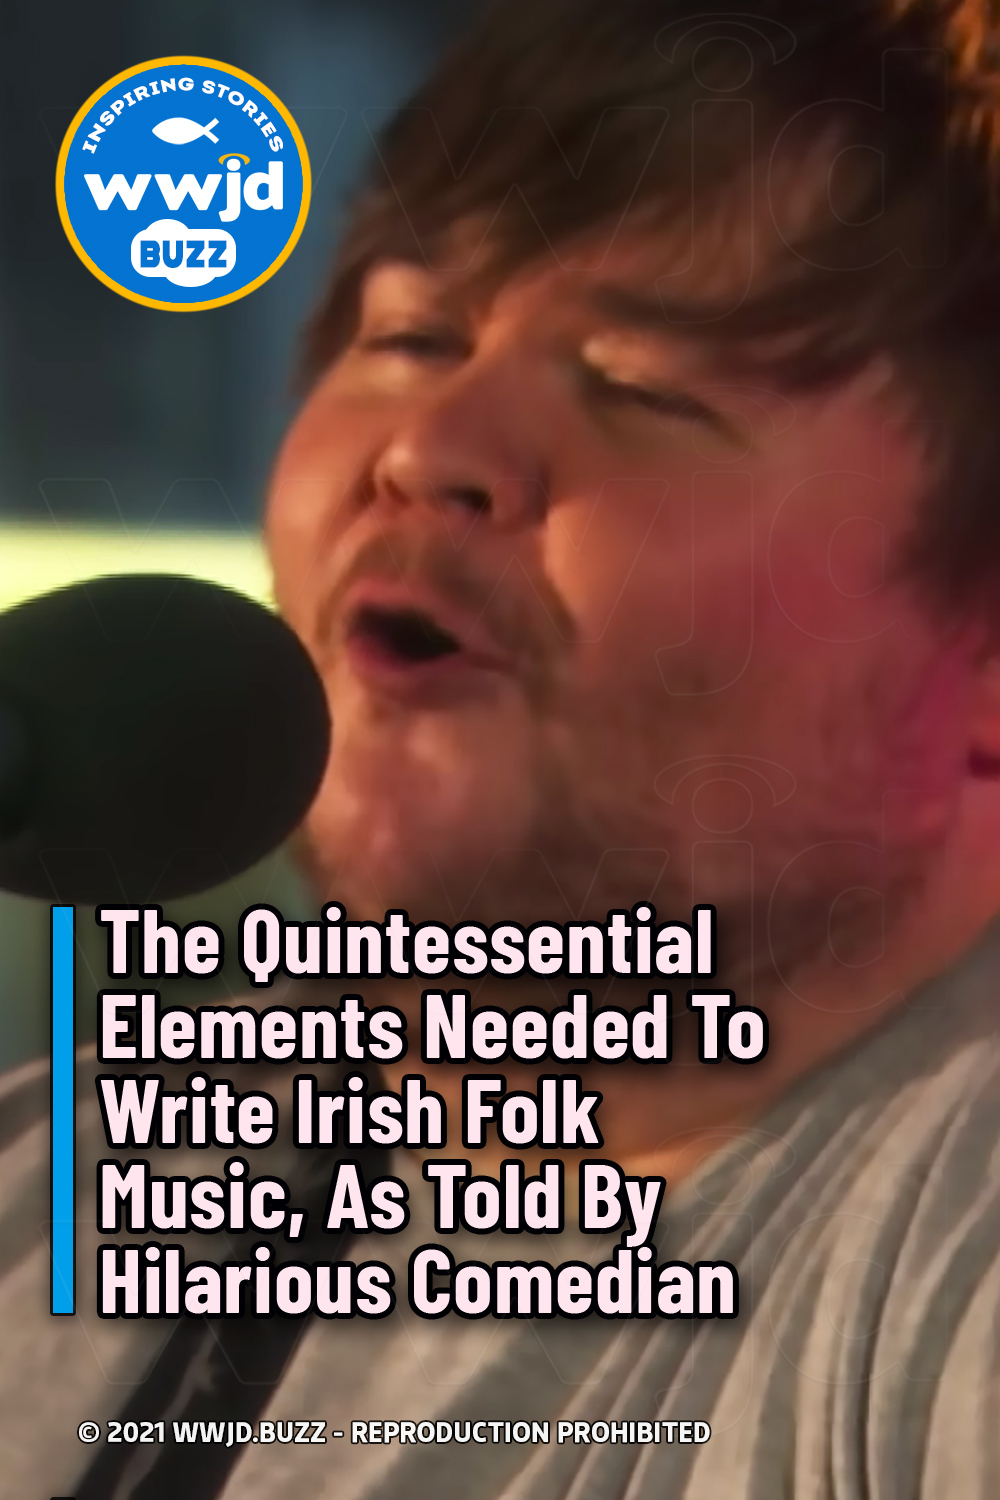 The Quintessential Elements Needed To Write Irish Folk Music, As Told By Hilarious Comedian